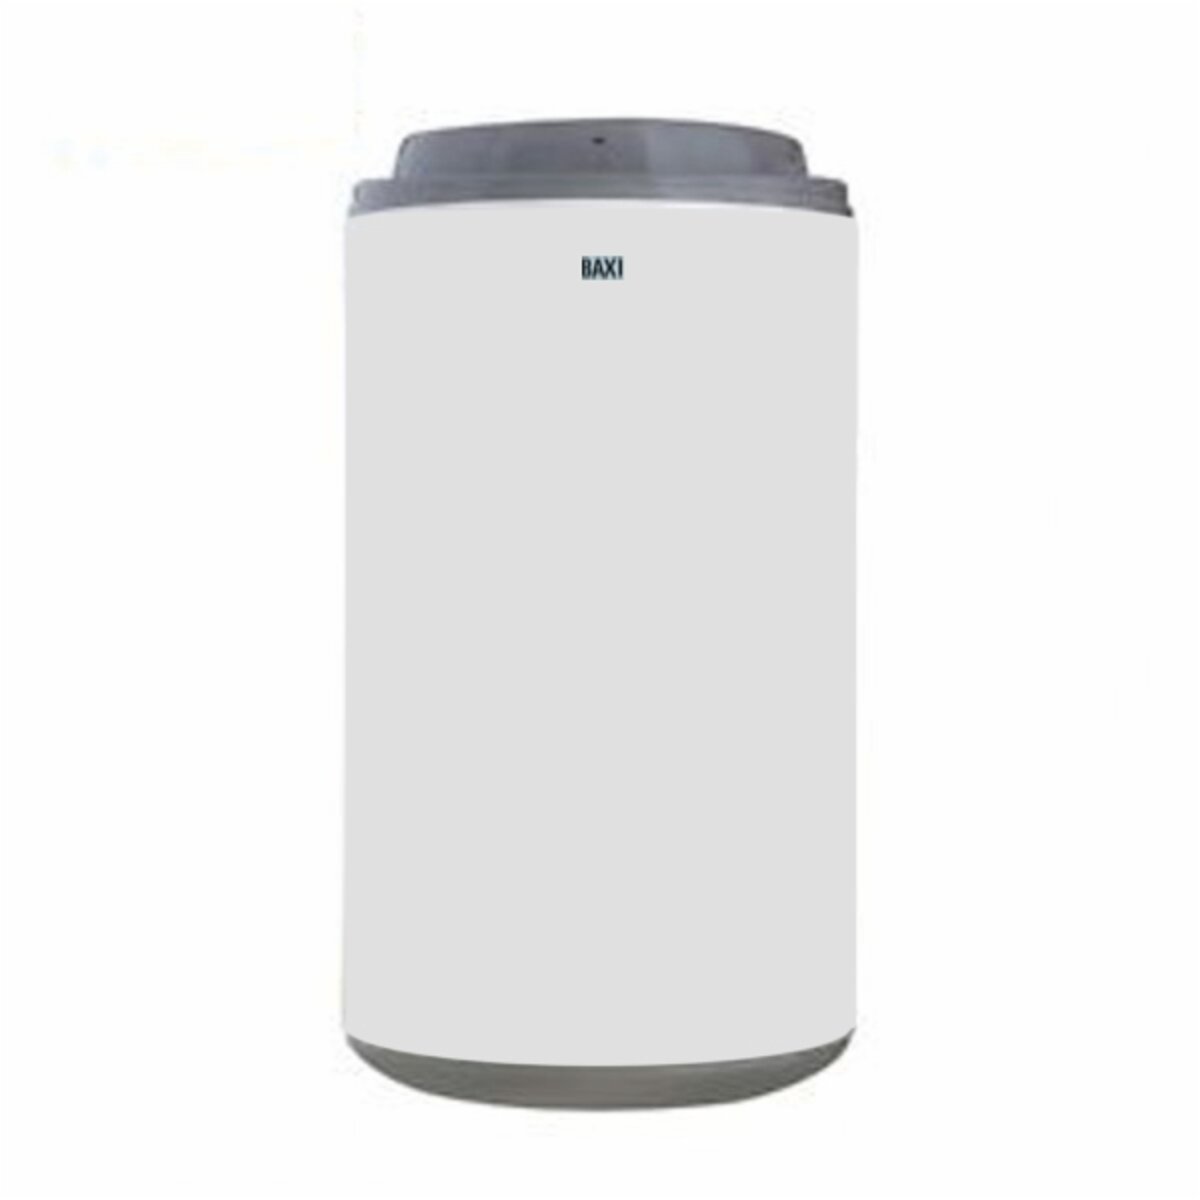 Electric water heater ExtrA + Baxi r201sl line 10 liters under sink 2 years